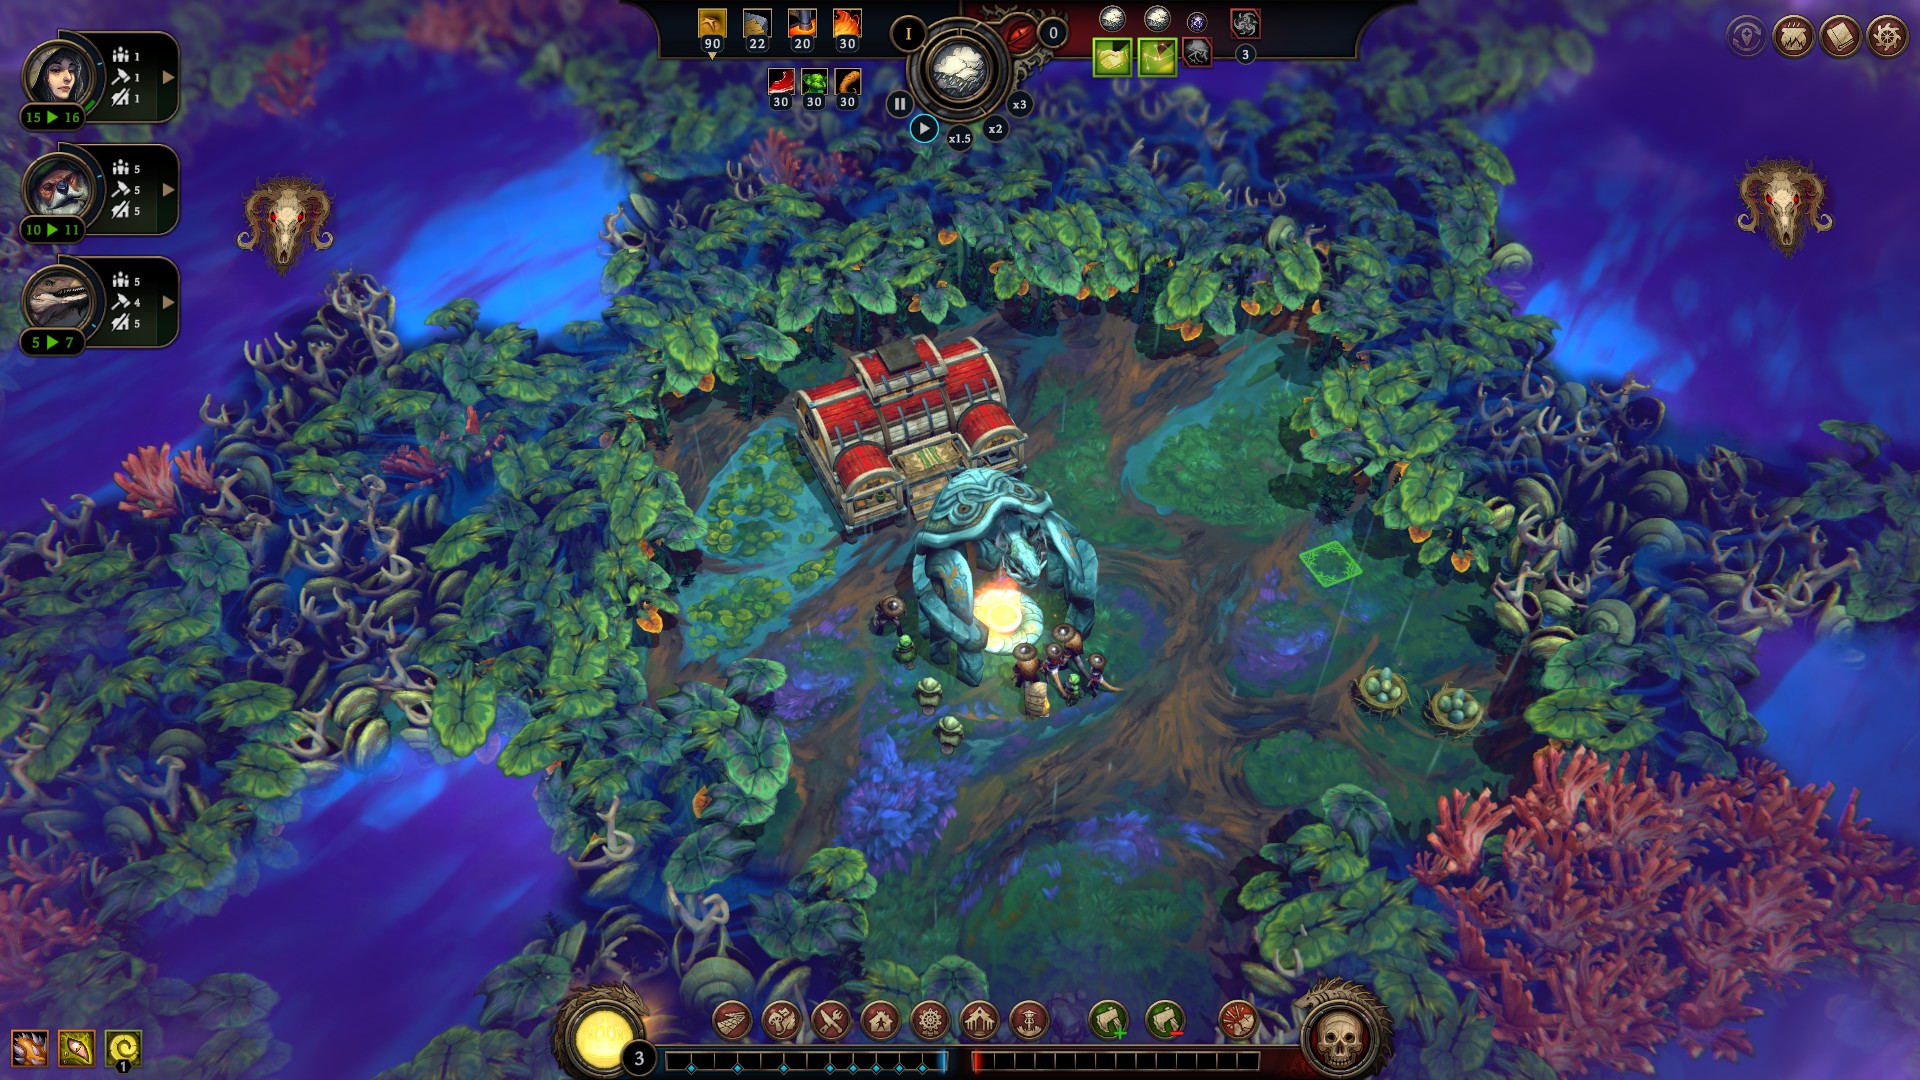 In-game Against the Storm screenshot showing the Coral Forest biome.